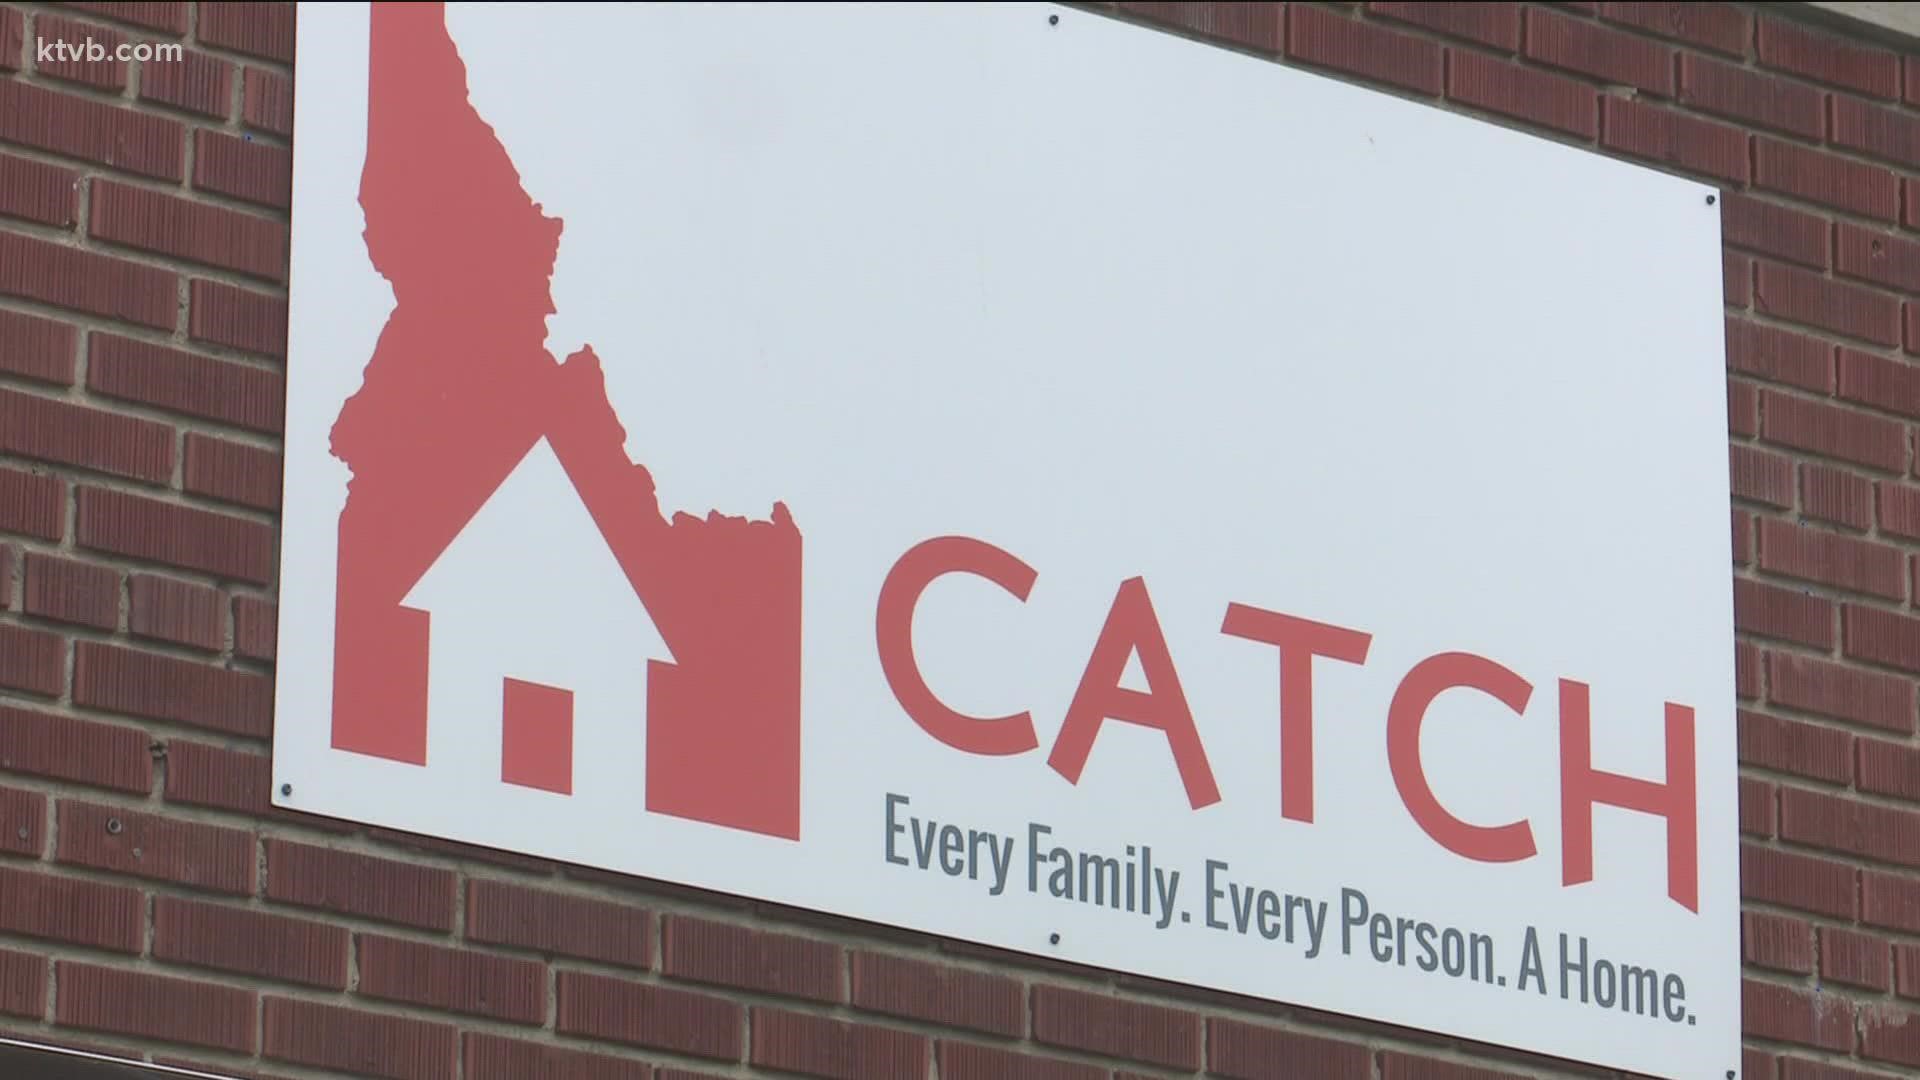 According to their website, the local nonprofit plans to house 22 more families experiencing homelessness in 2022 by securing $22 monthly donations.